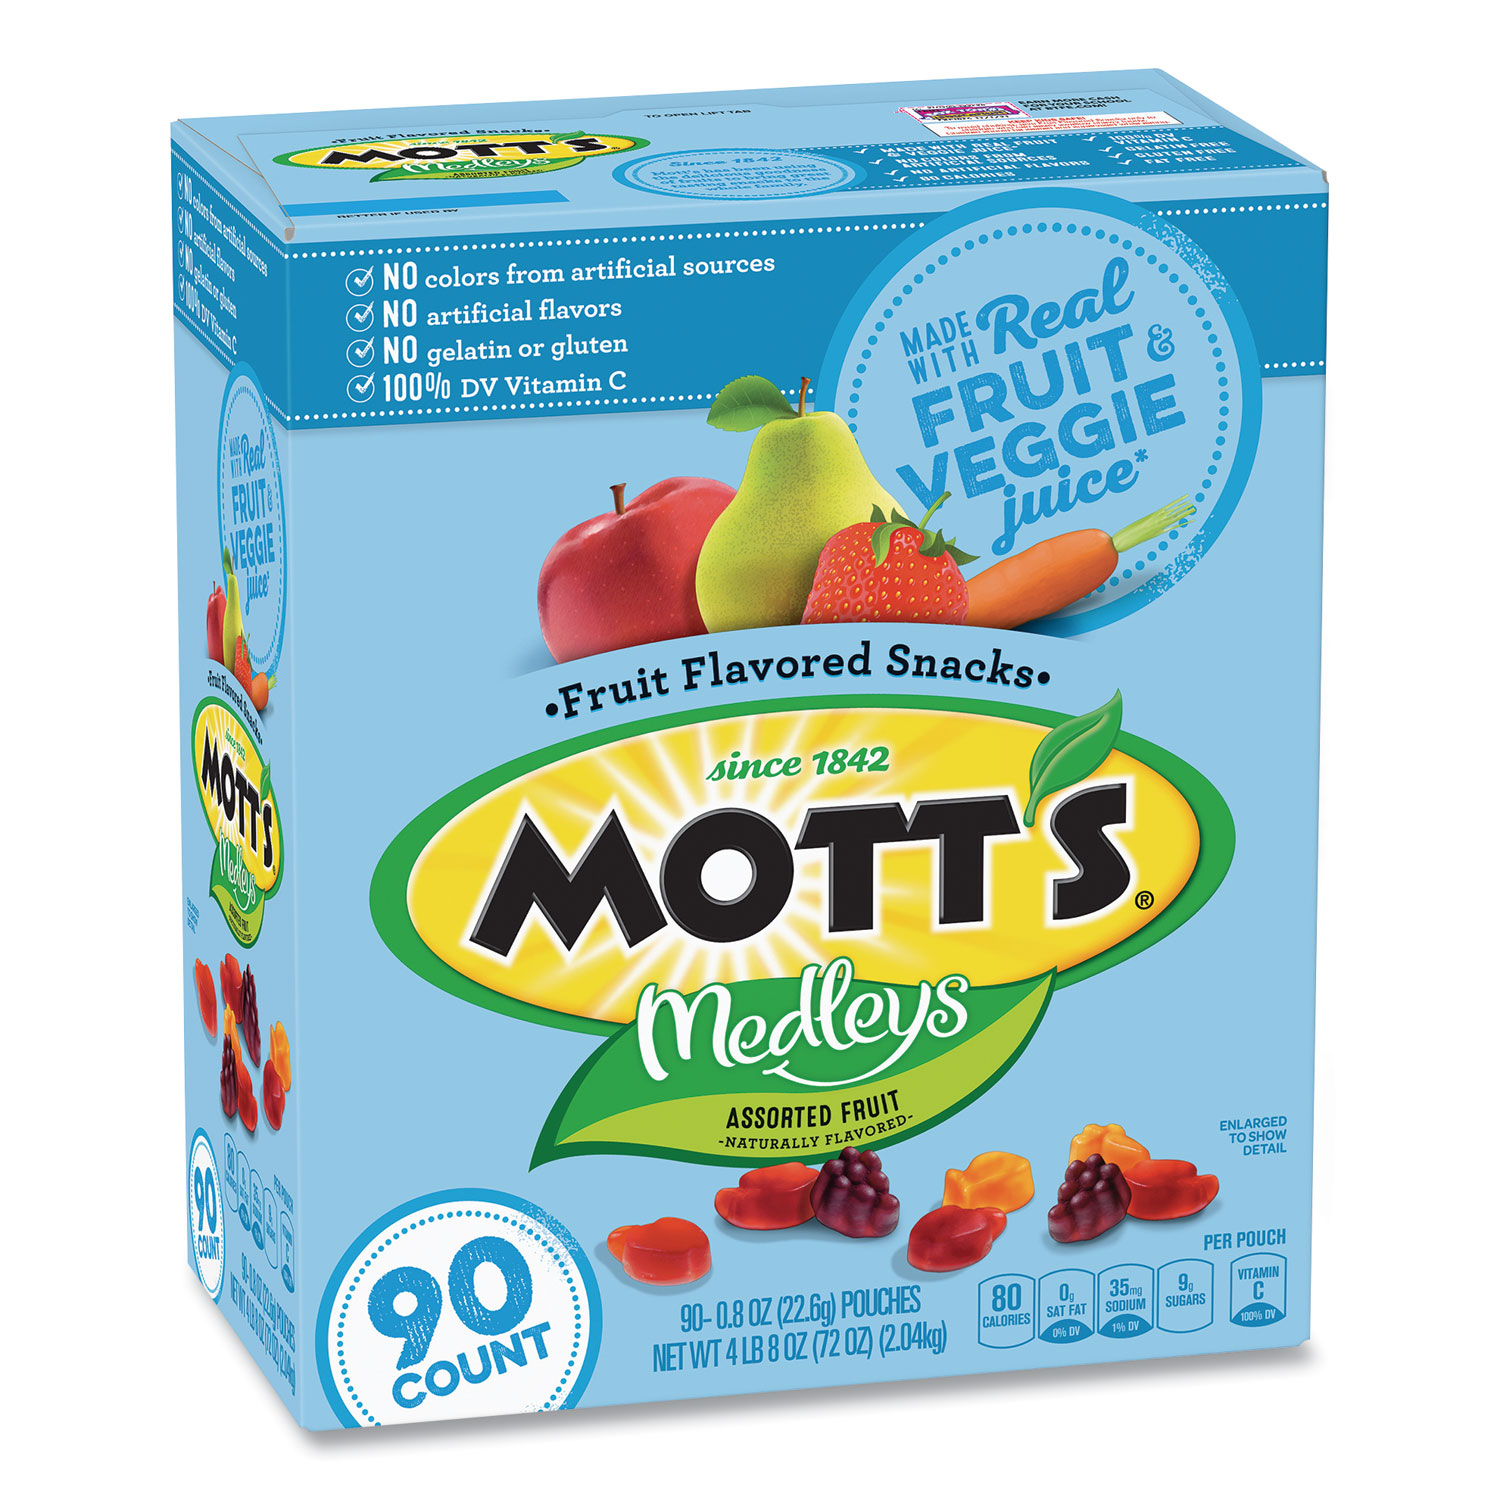  Mott's 66002 Medleys Fruit Snacks, 0.8 oz Pouch, 90 Pouches/Box, Free Delivery in 1-4 Business Days (GRR20900325) 